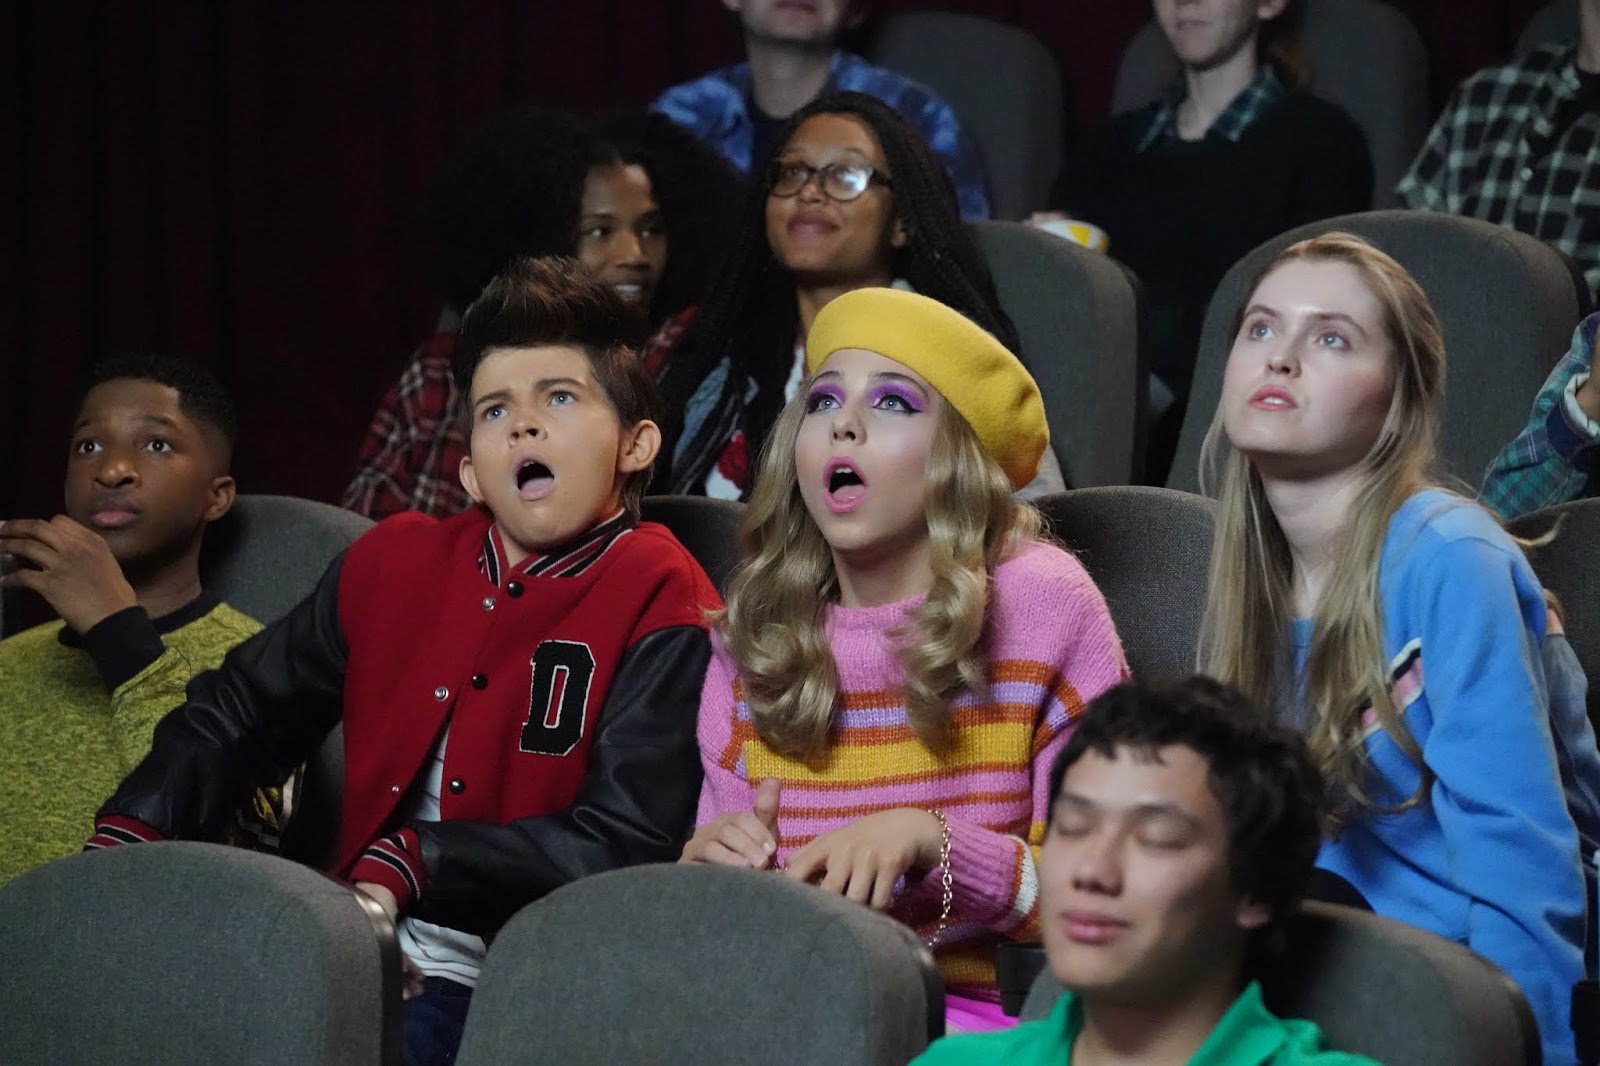 NickALive!: The Cast of Nickelodeon's All New 'All That' Share  Behind-the-Scenes Secrets